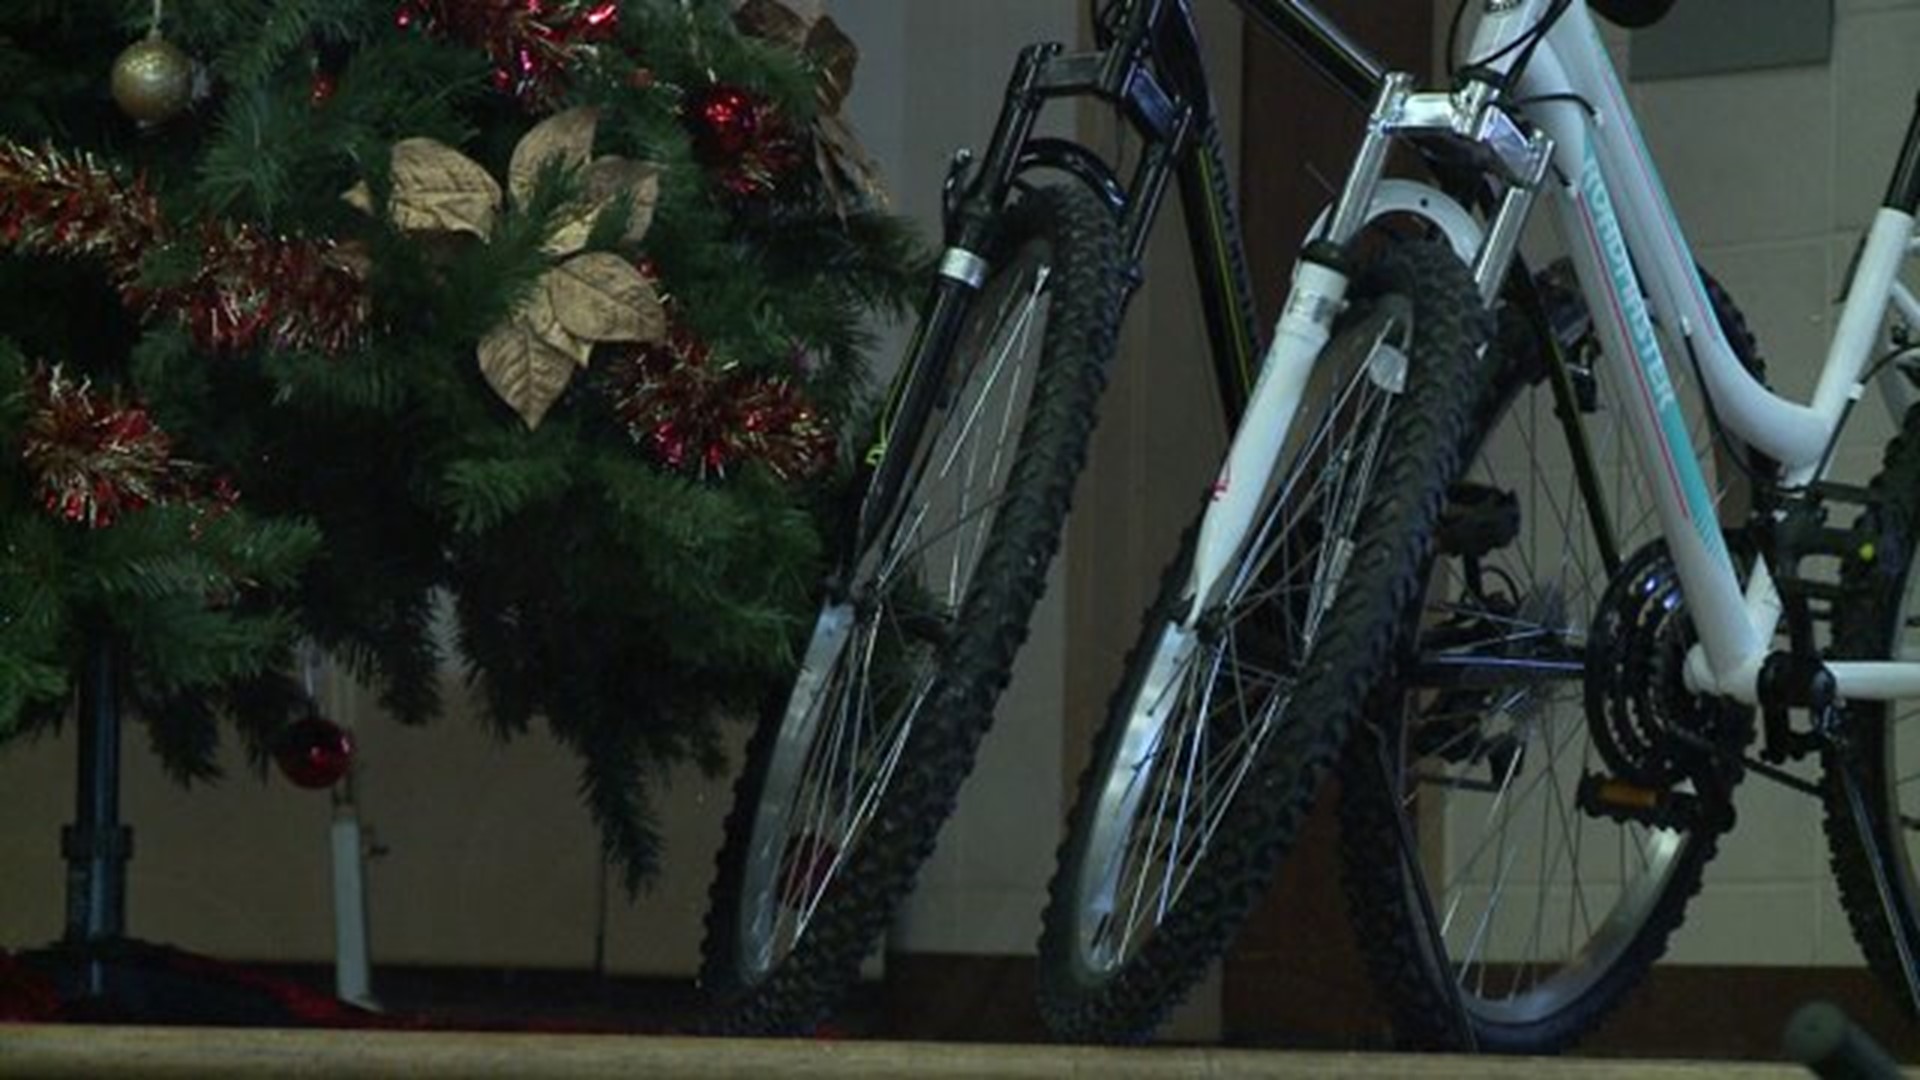 Kids in foster care get a Christmas treat thanks to 2 local businessmen